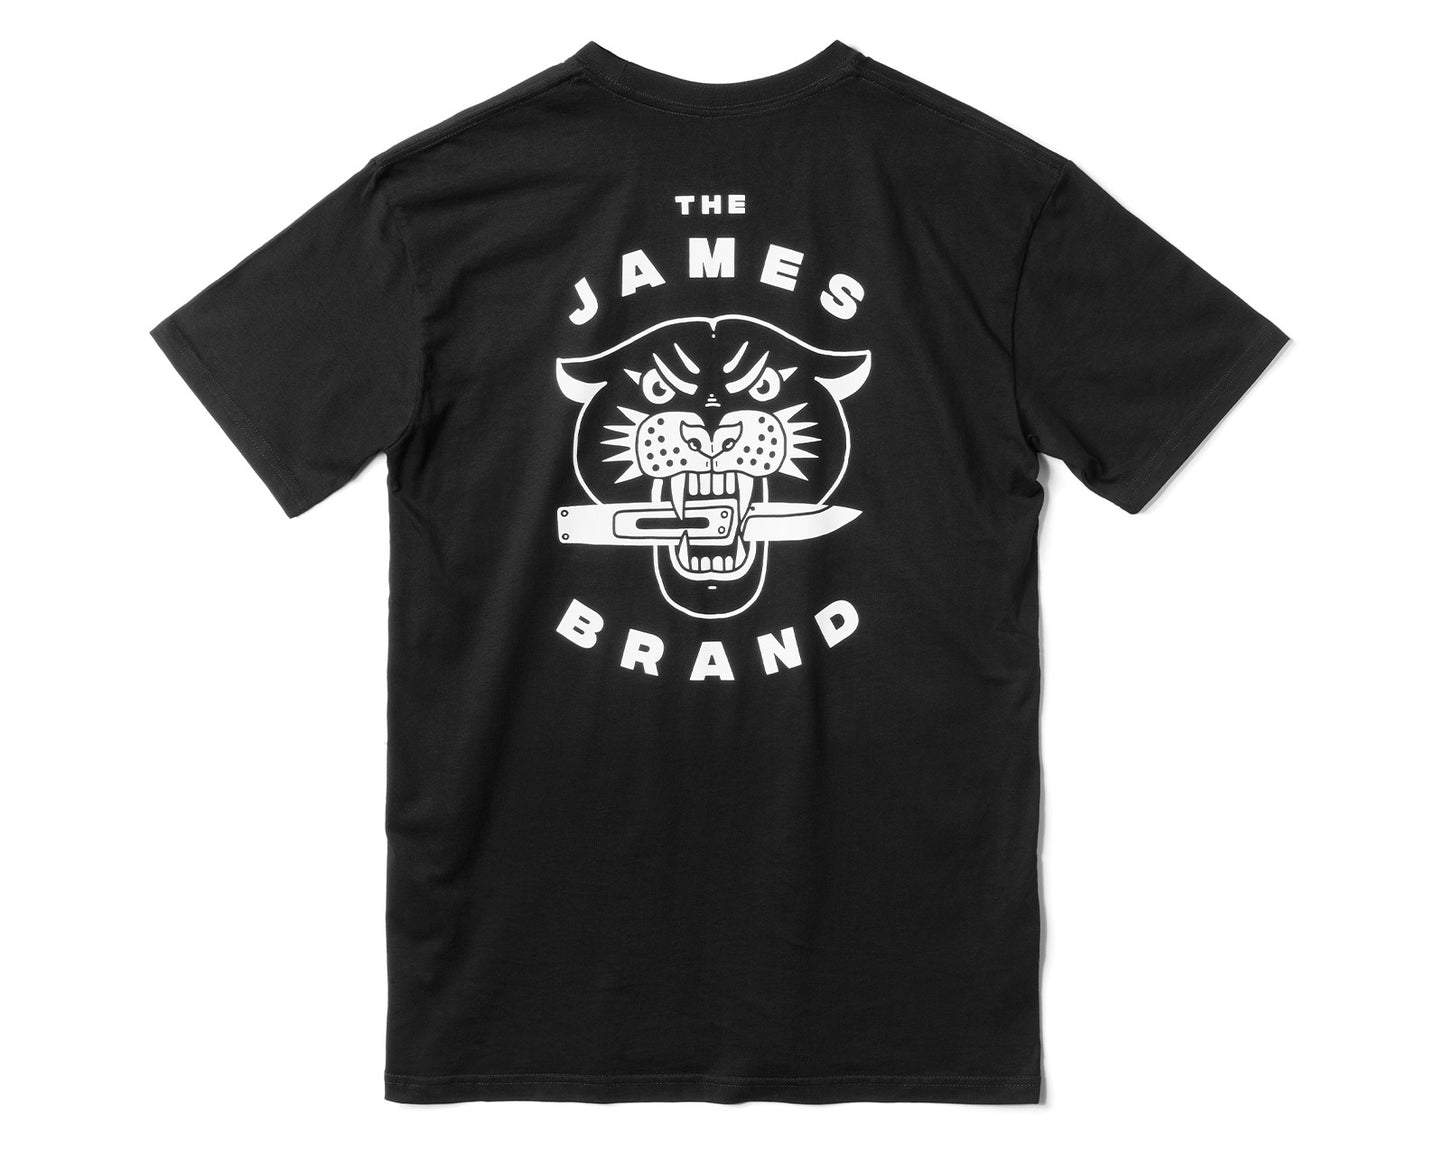 Back of black t-shirt with the james brand tiger logo